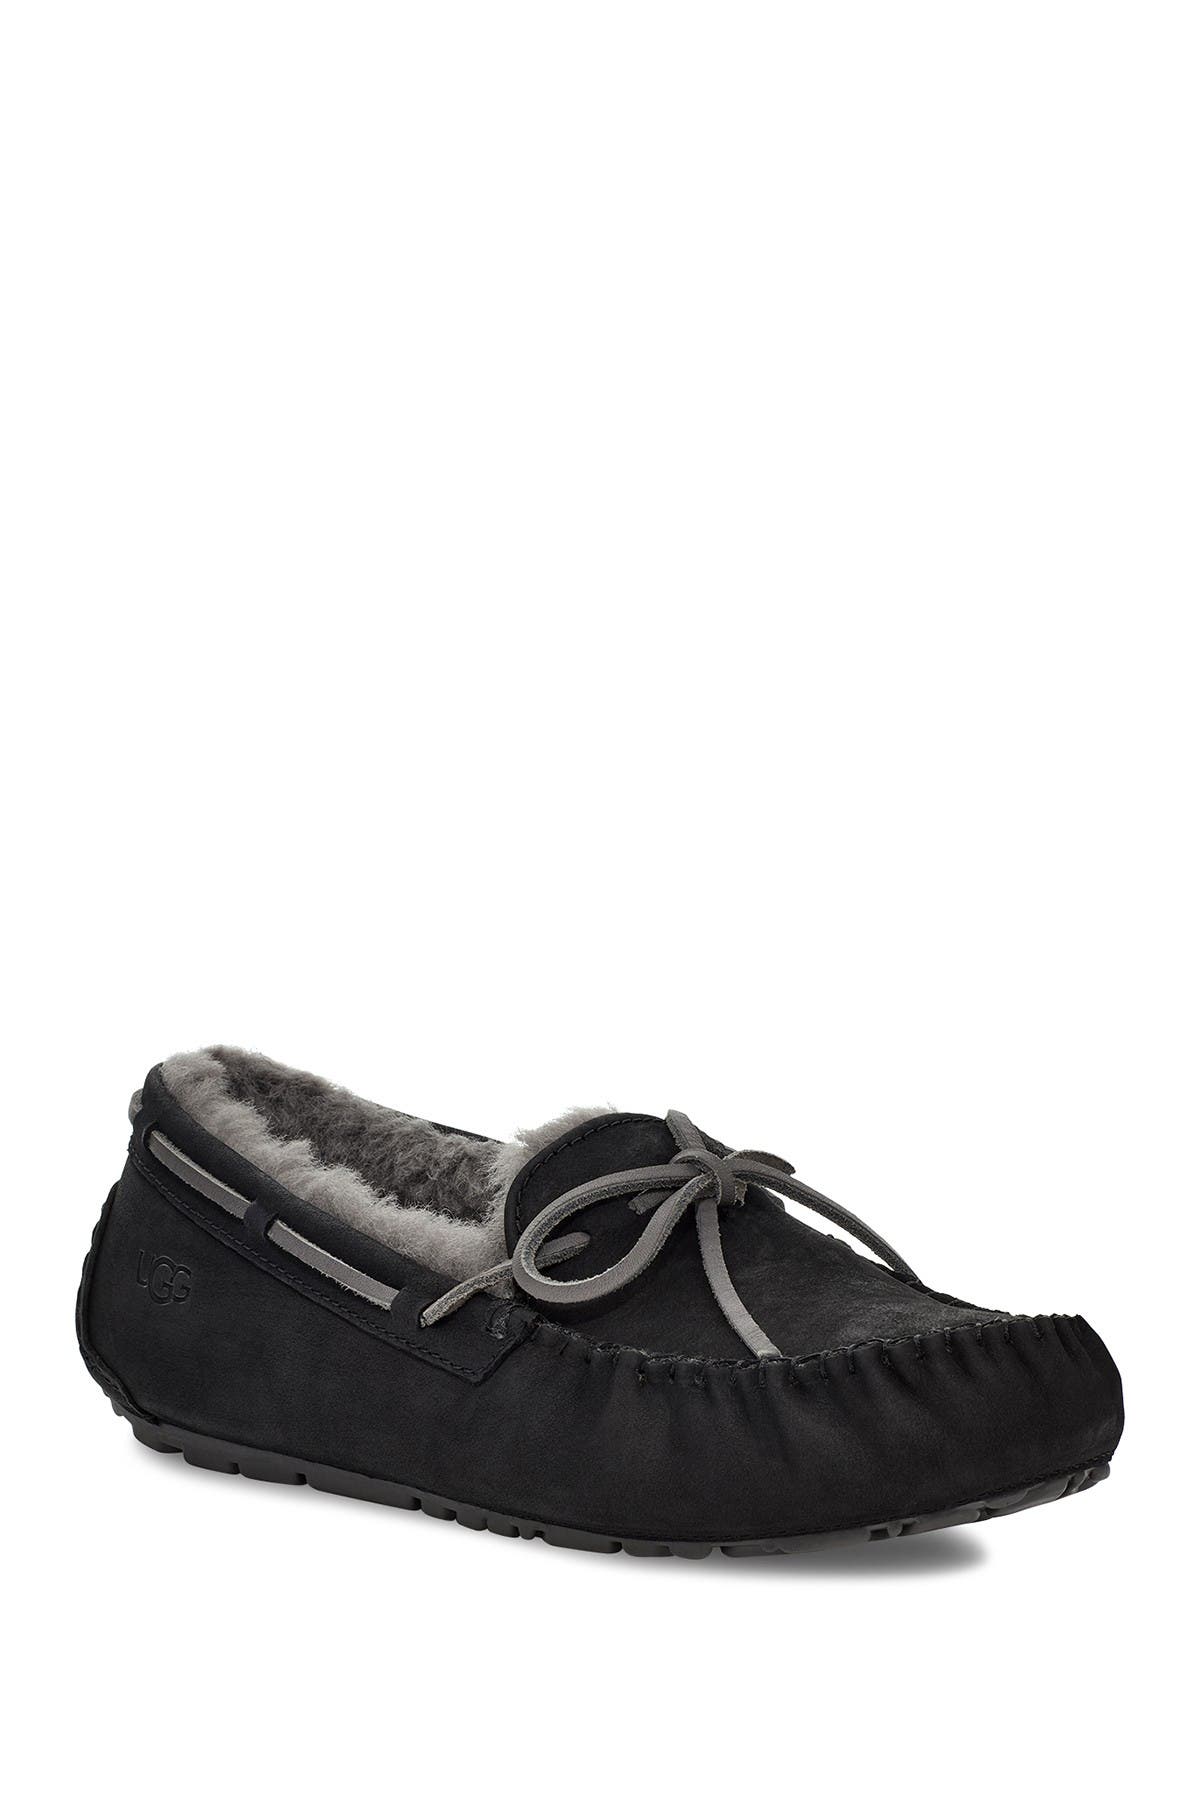 Ugg Pure Lined Slipper In Black